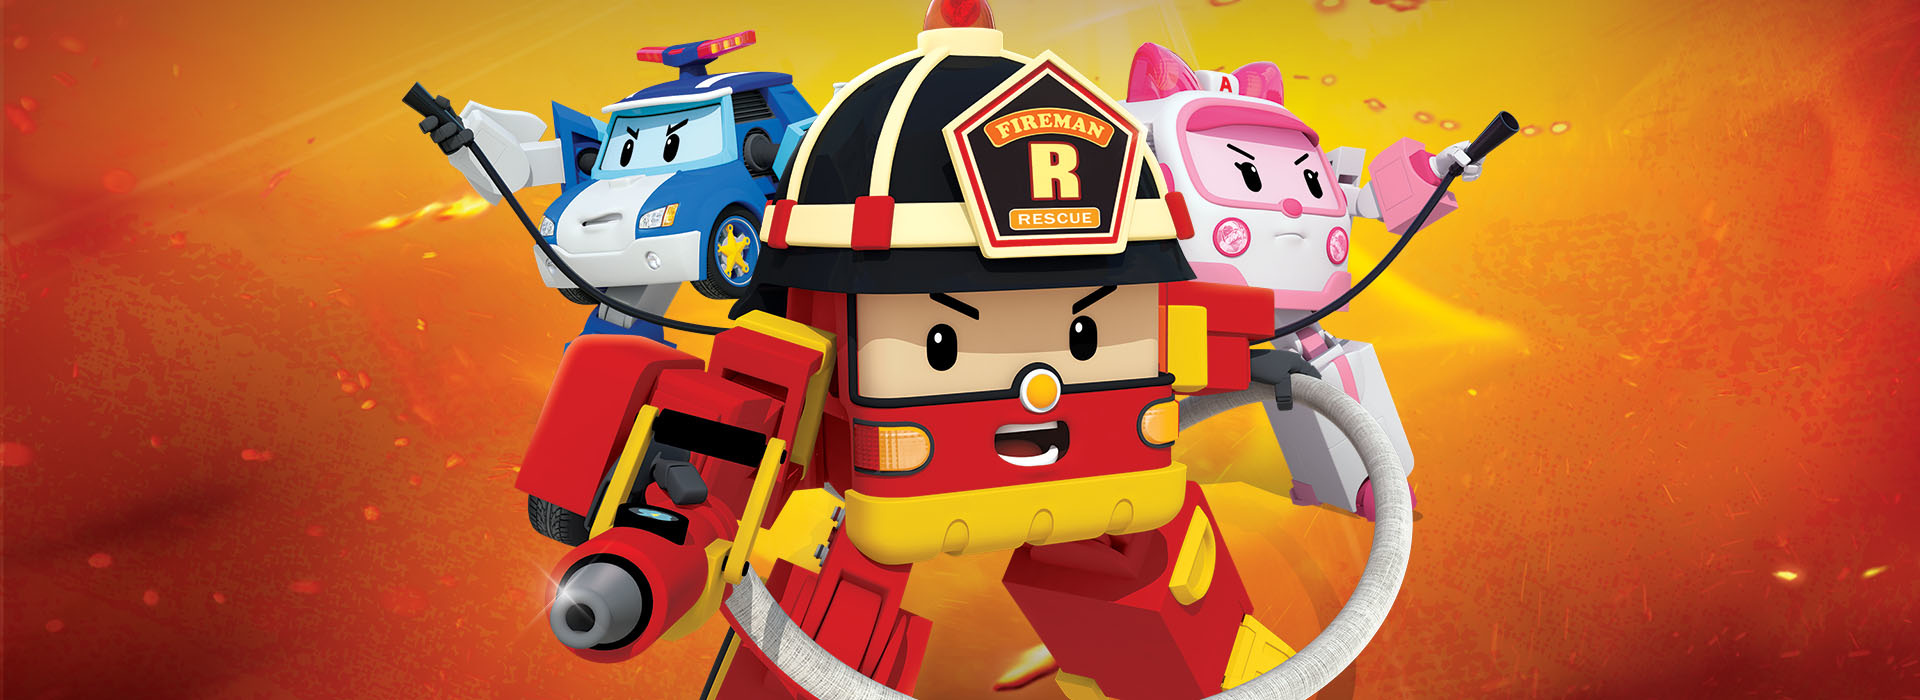 Series poster Robocar Poly: Roy and Fire Safety